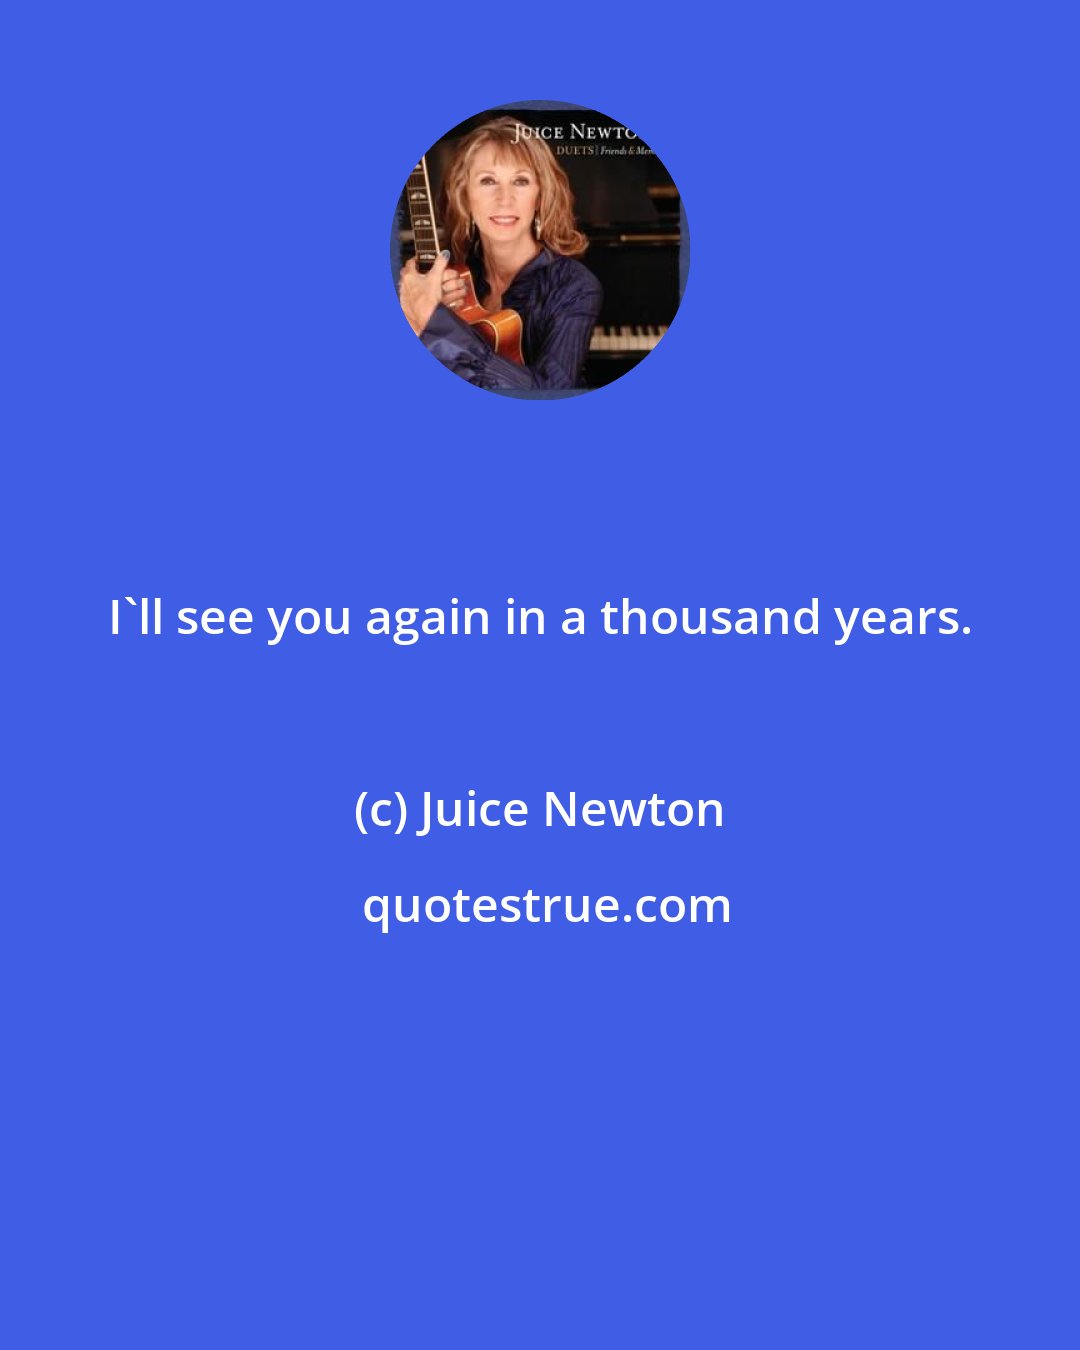 Juice Newton: I'll see you again in a thousand years.